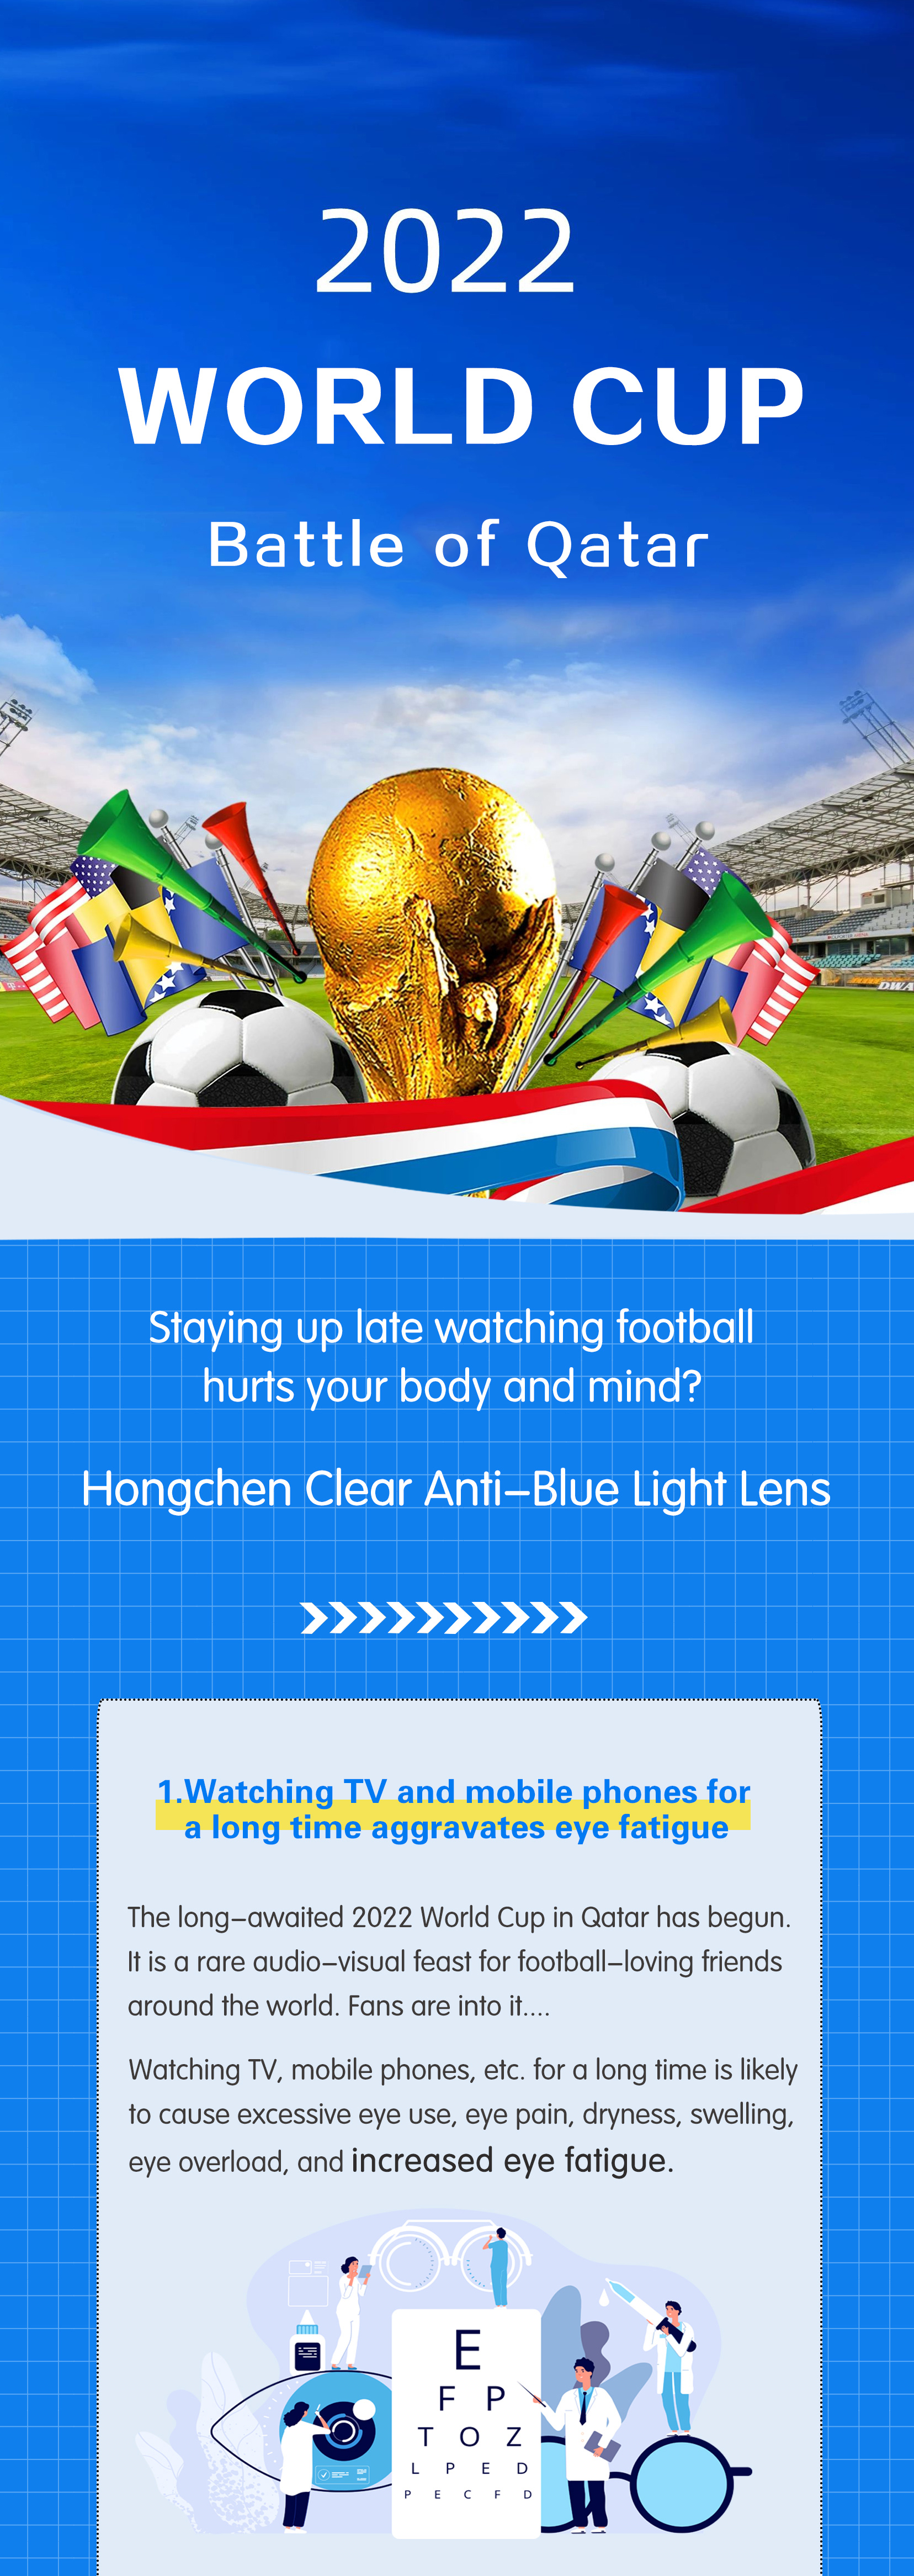 [Hongchen clear bottom anti-blue light lens] Helps to watch the World Cup without hurting the eyes